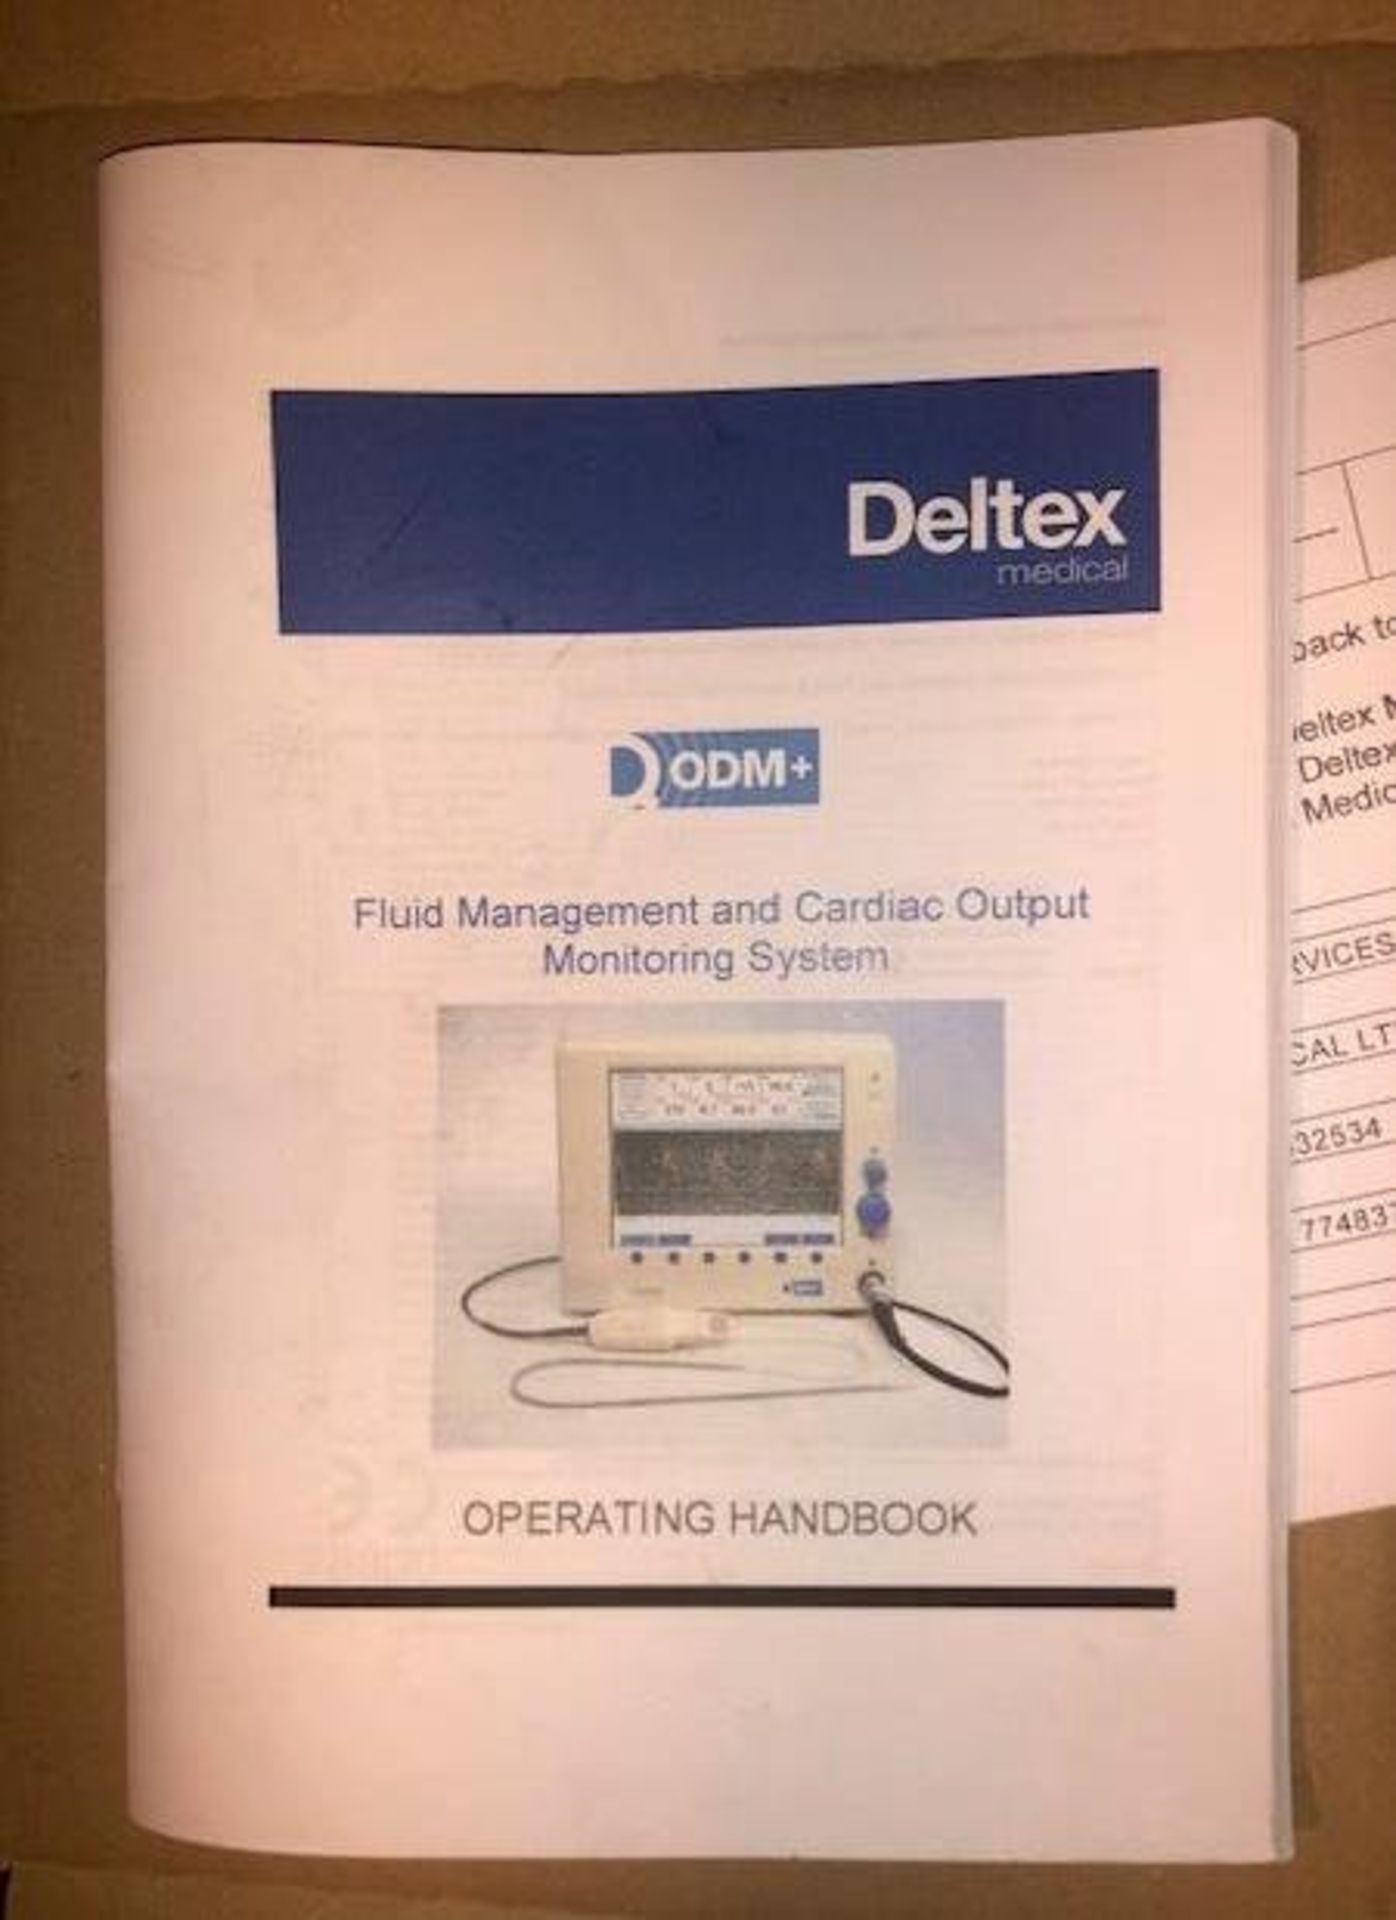 LOCATED OFF SITE - 5x Deltex CardioQ-ODM+ patient monitors - The world’s first fluid manag - Image 8 of 10